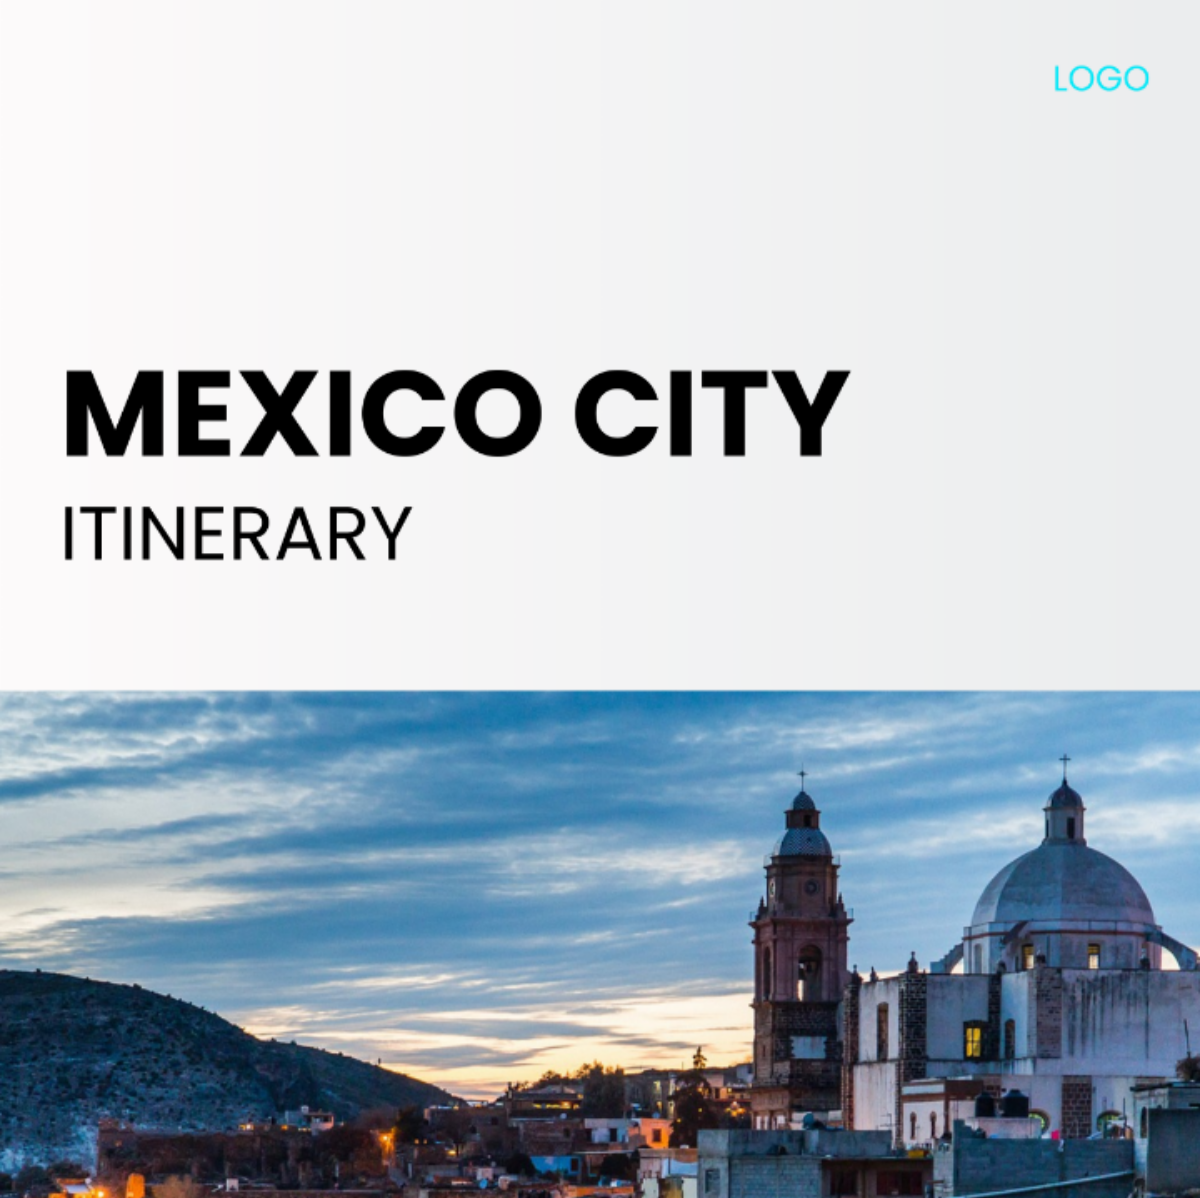 Mexico City Itinerary Template